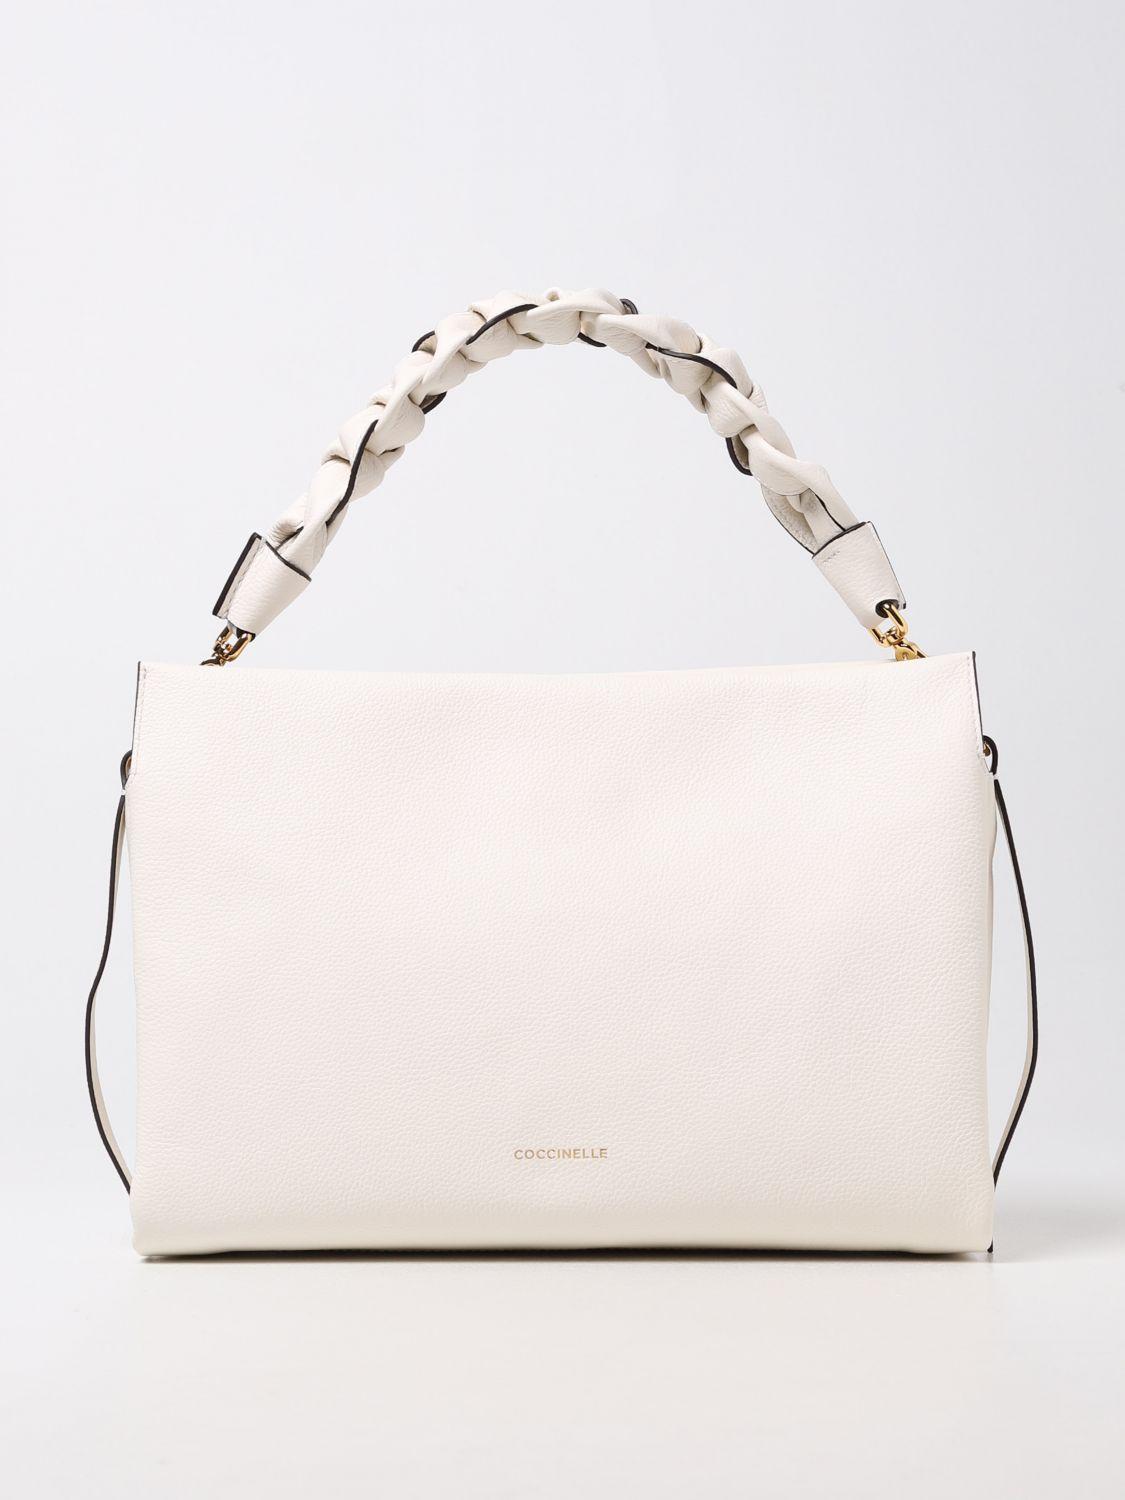 Coccinelle Bag In Grained Leather in White 1 (White) | Lyst